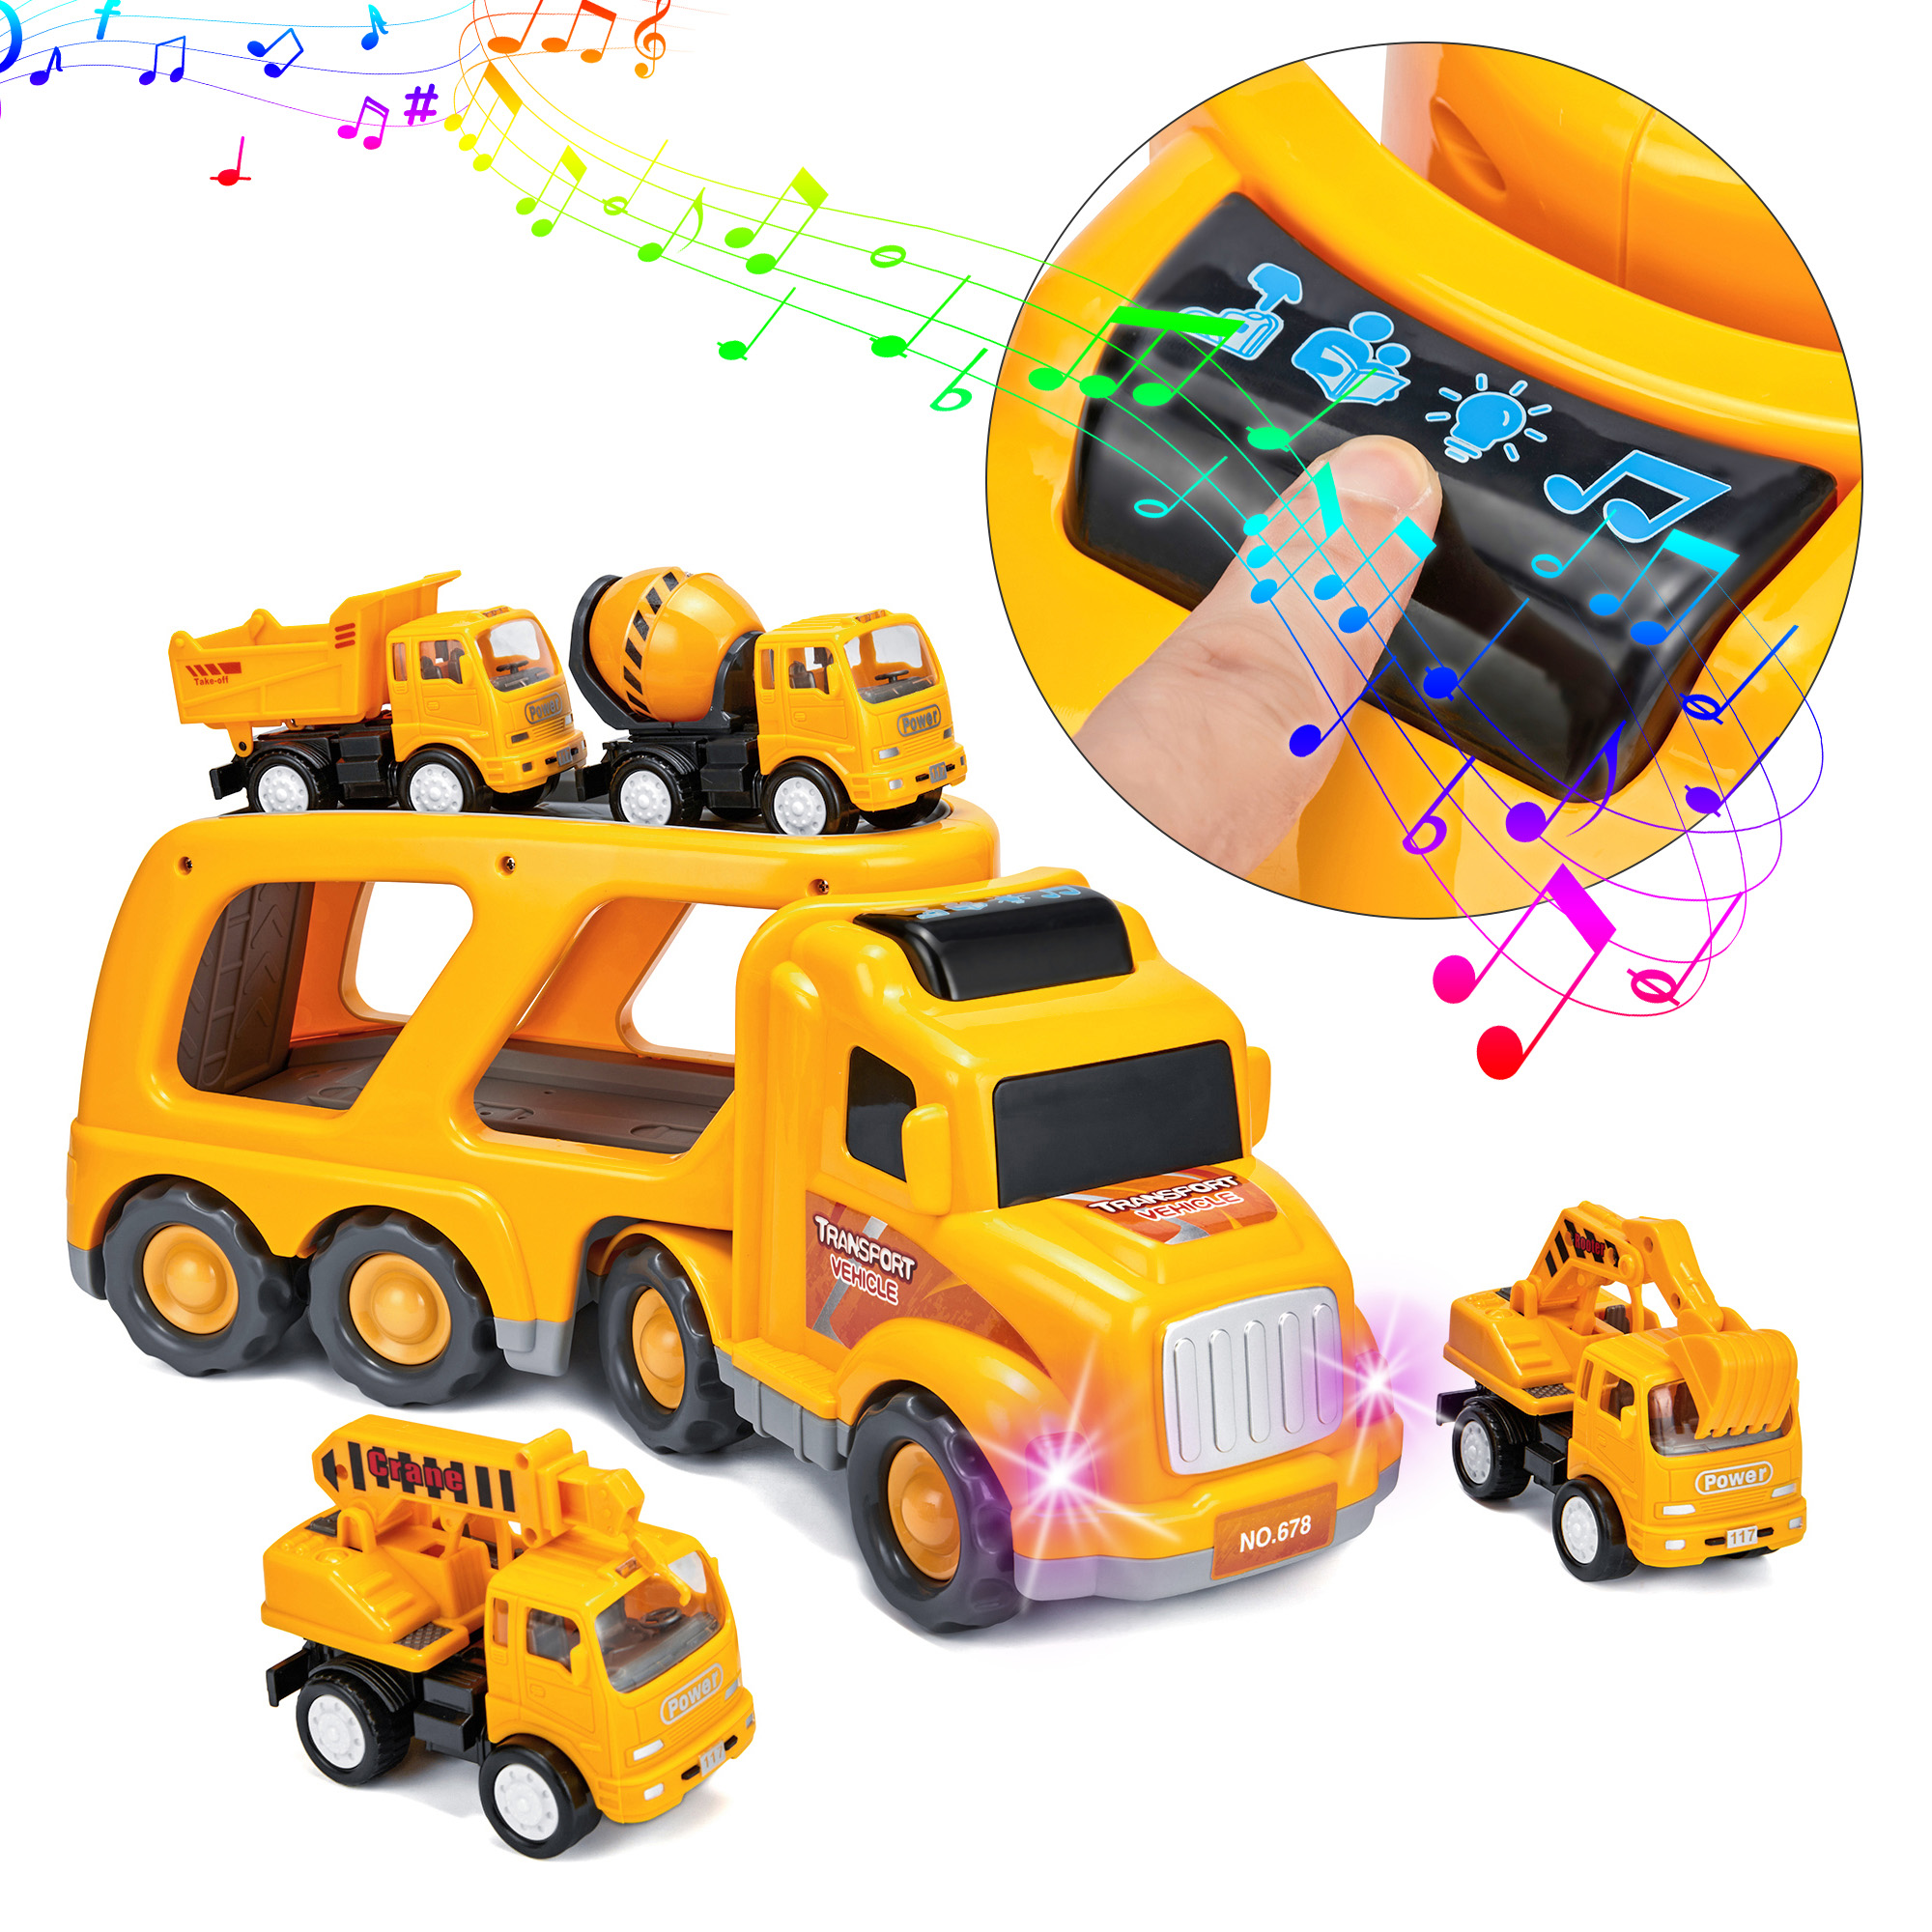 DODOING 5 in 1 Construction Truck Toys Vehicles Set,Transport Truck Carrier Toy with Excavator Mixer Crane Dump, Real Siren Brake Sounds & Lights, Removable Engineering Vehicle Parts - image 4 of 7